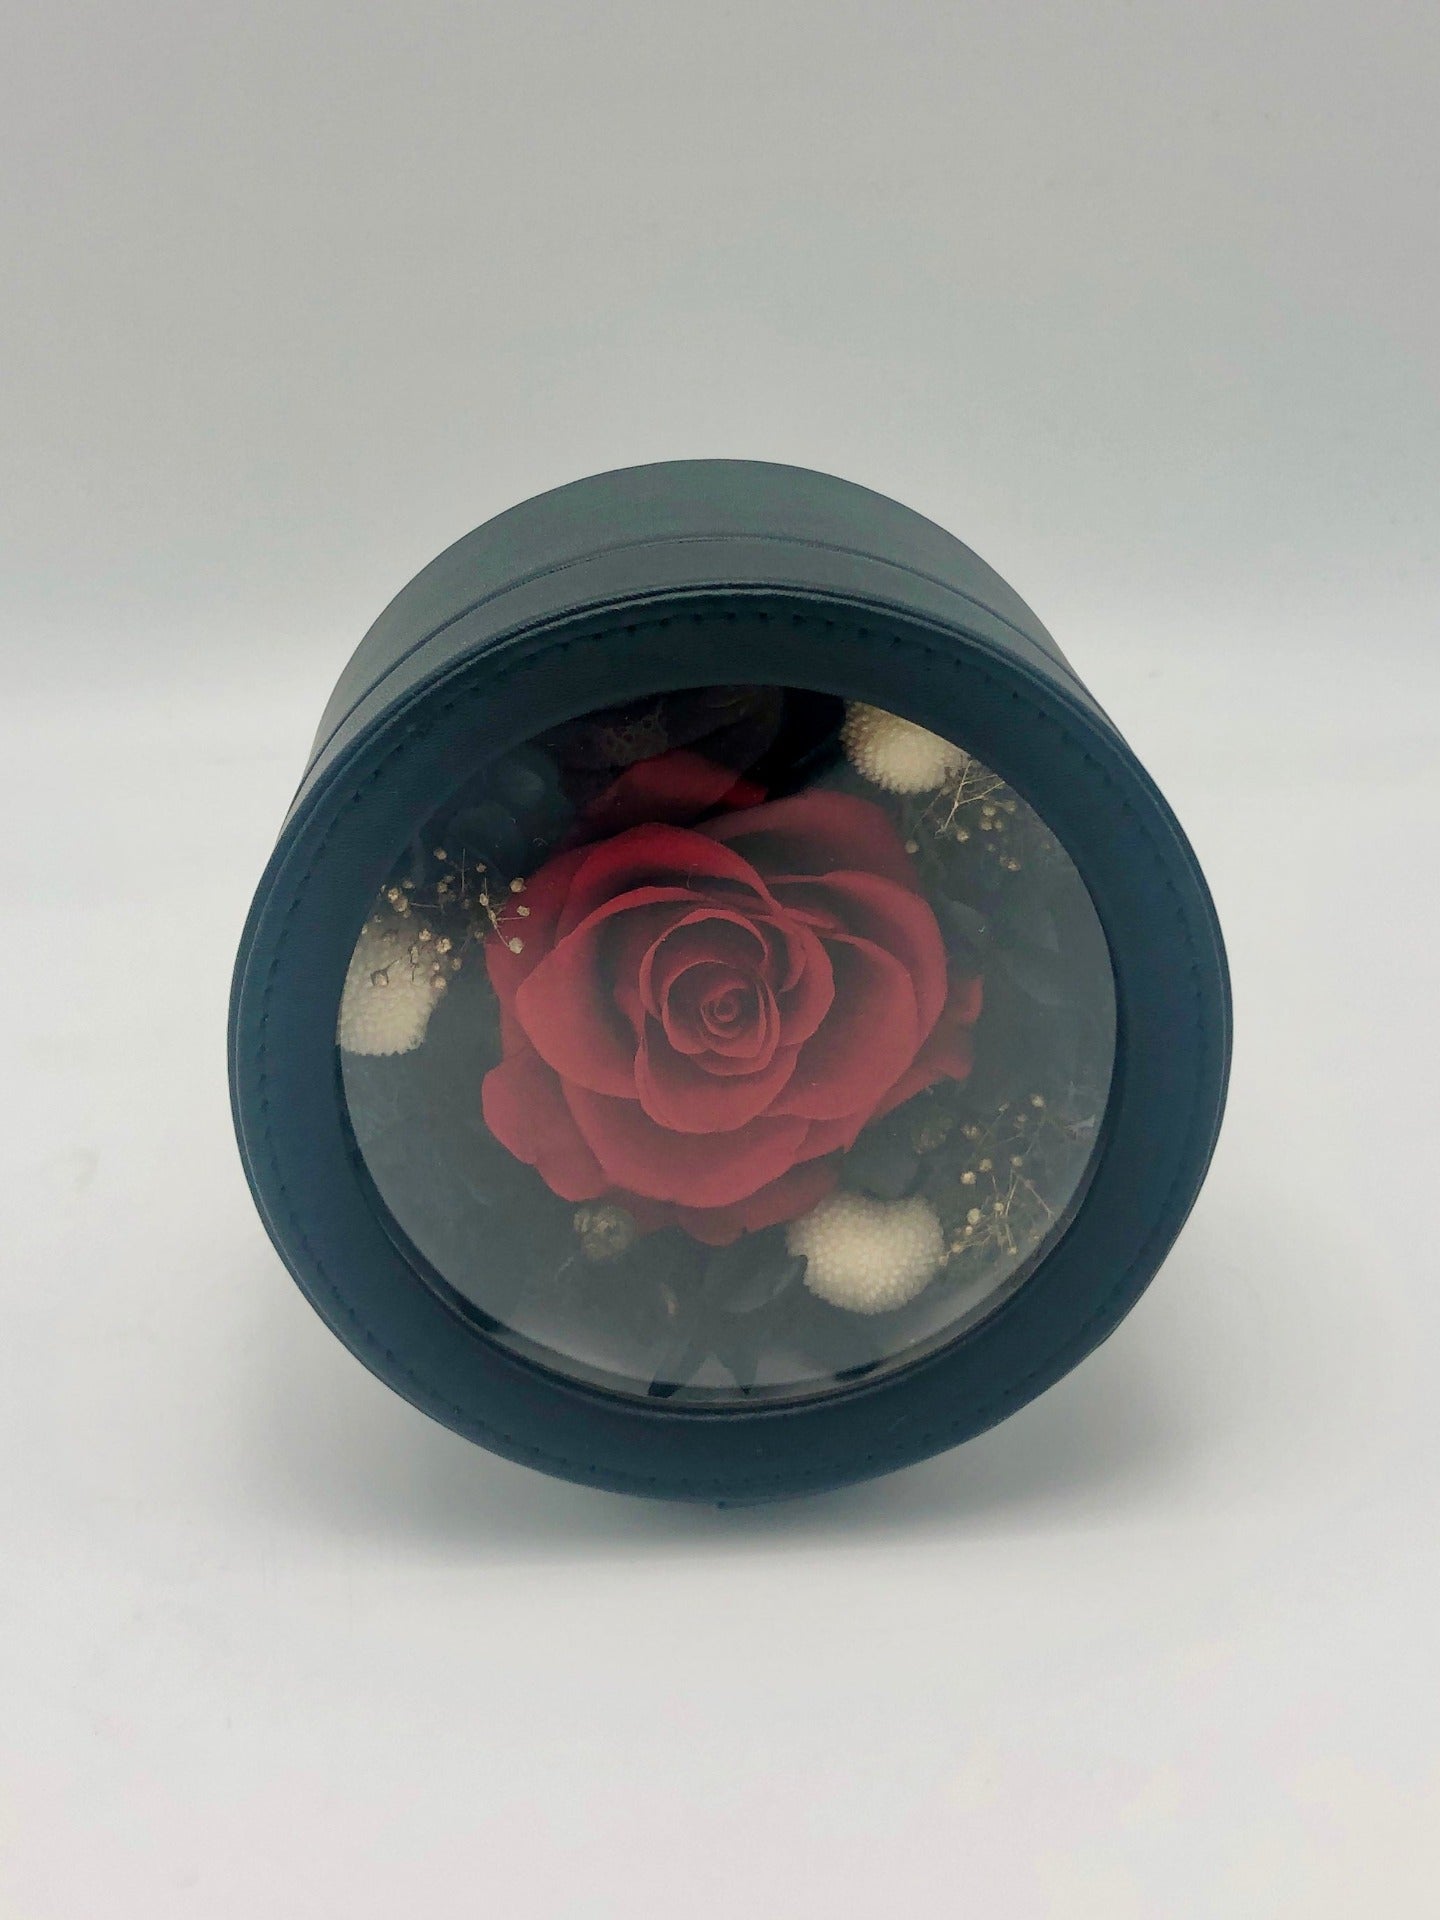 A photo of a preserved red rose, nestled among black and natural flowers in a black gift box. A perfect symbol of everlasting love and beauty.